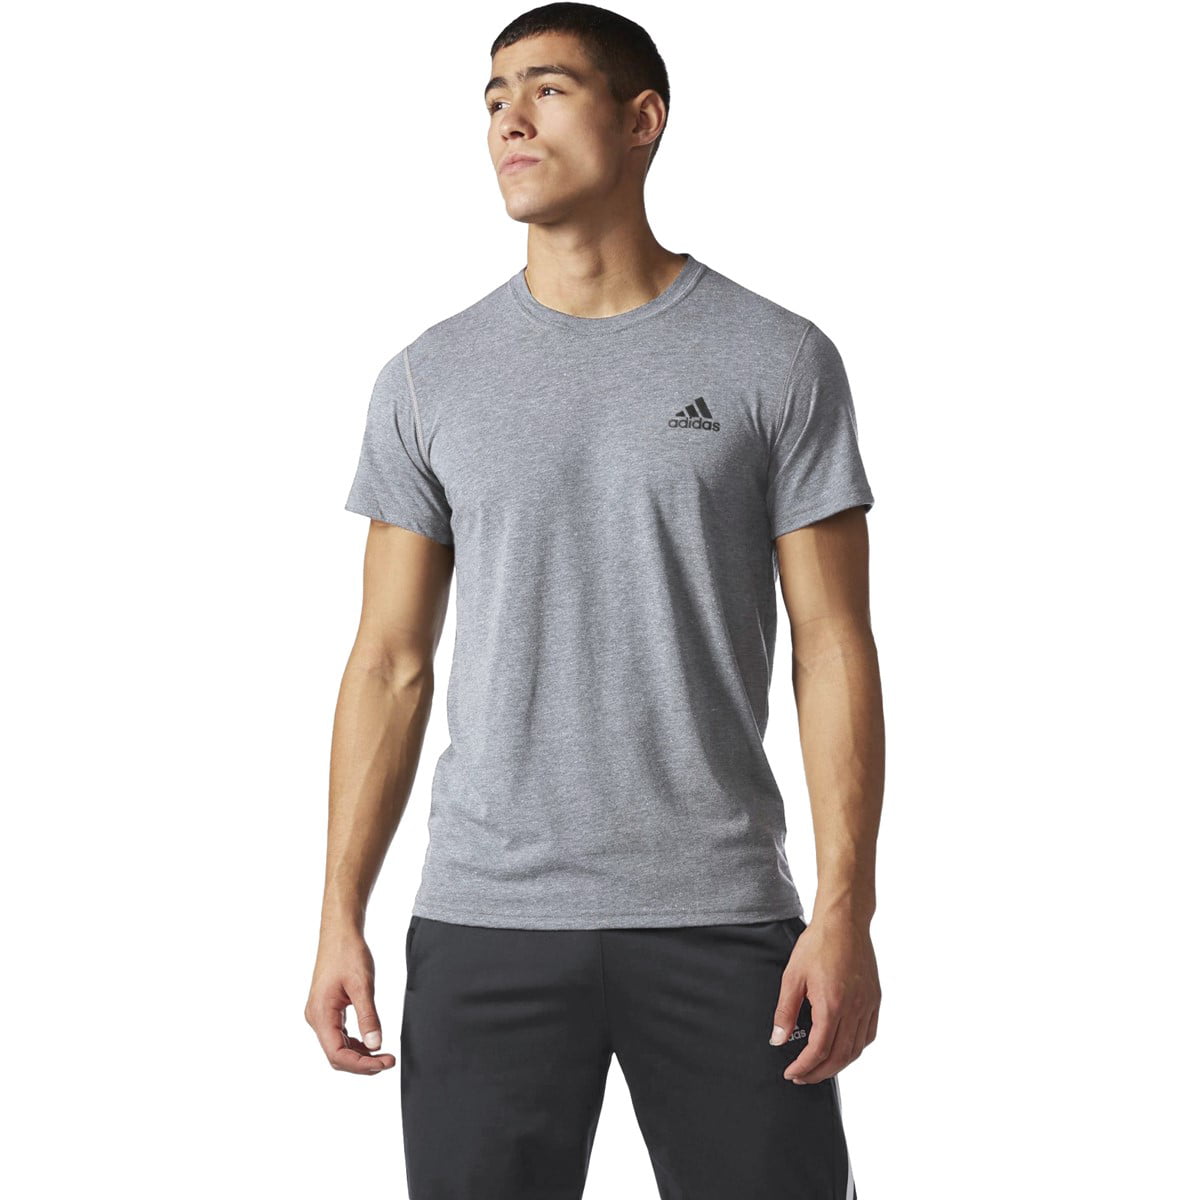 Arvind Sport | adidas Primeblue Collection. Discover Men's & Women's Shoes  & Clothes by Parley Ocean Plastic in Unique Offers | Offers | adidas  climalite leggings mens ware sale in india, Stock (4)